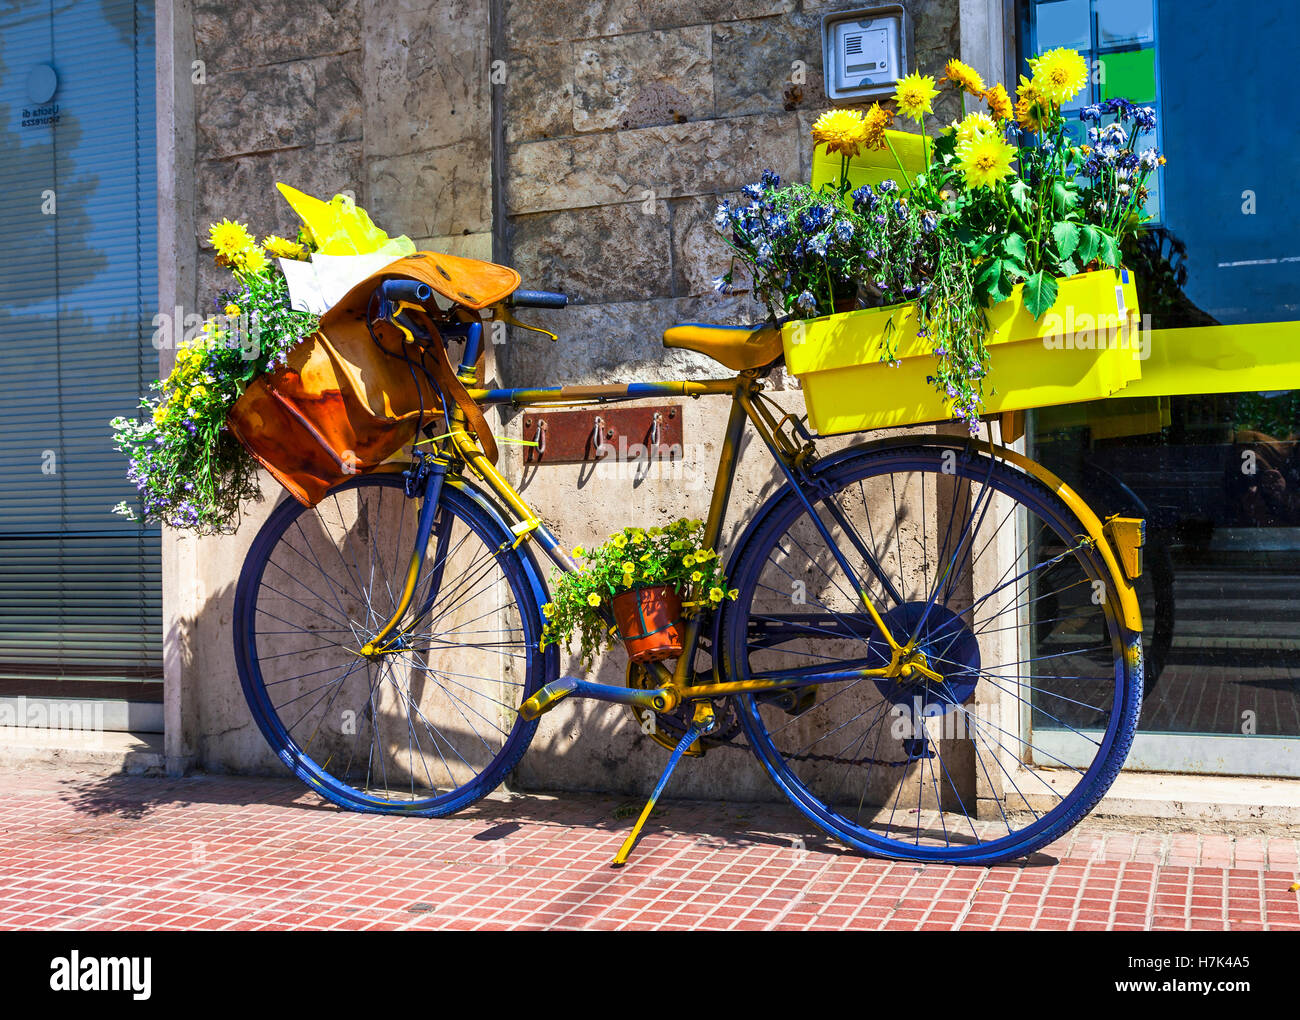 Floral streets decoration with bicycle. Stock Photo